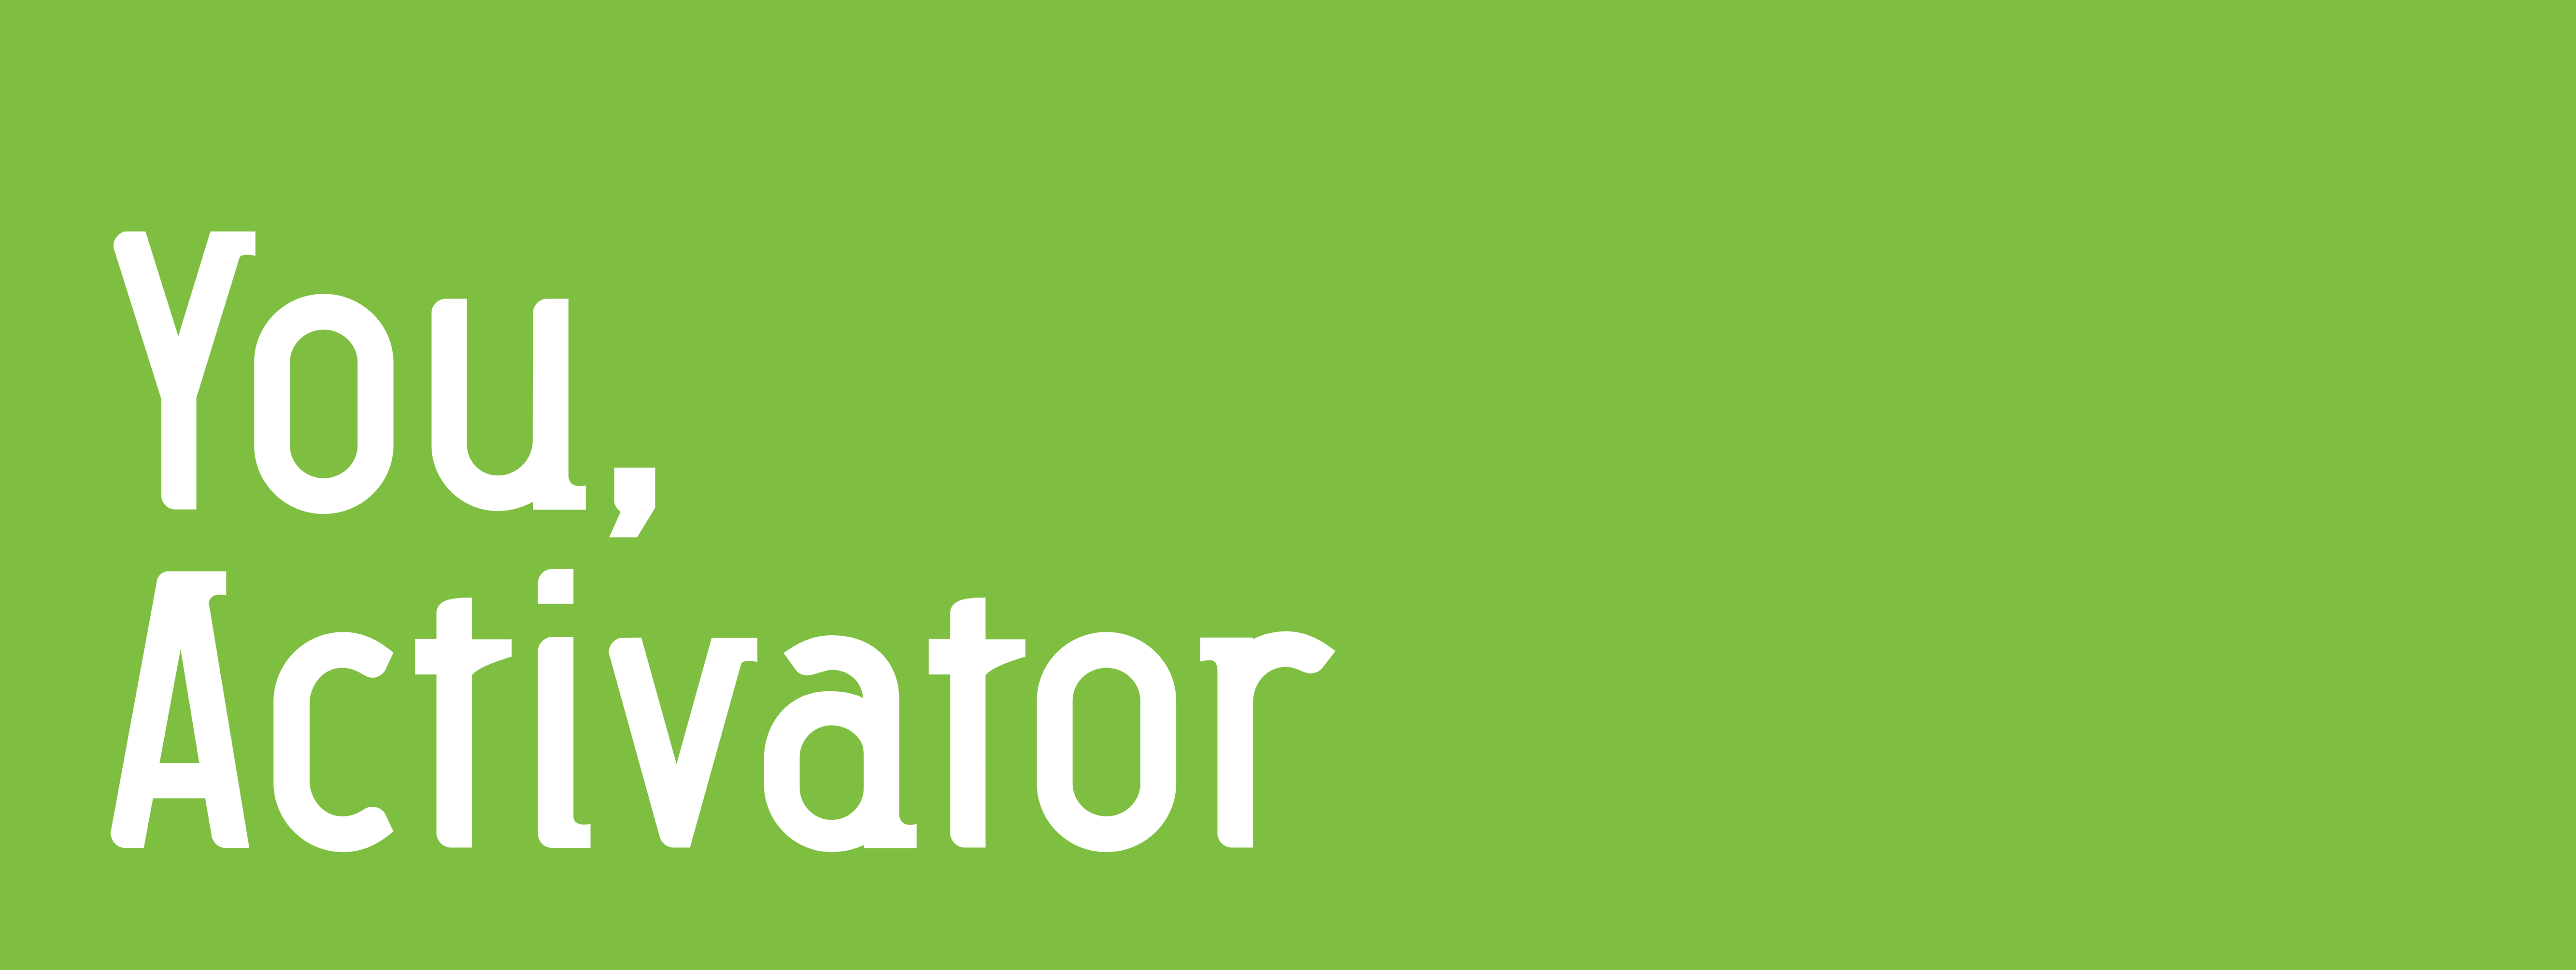 You, Activator